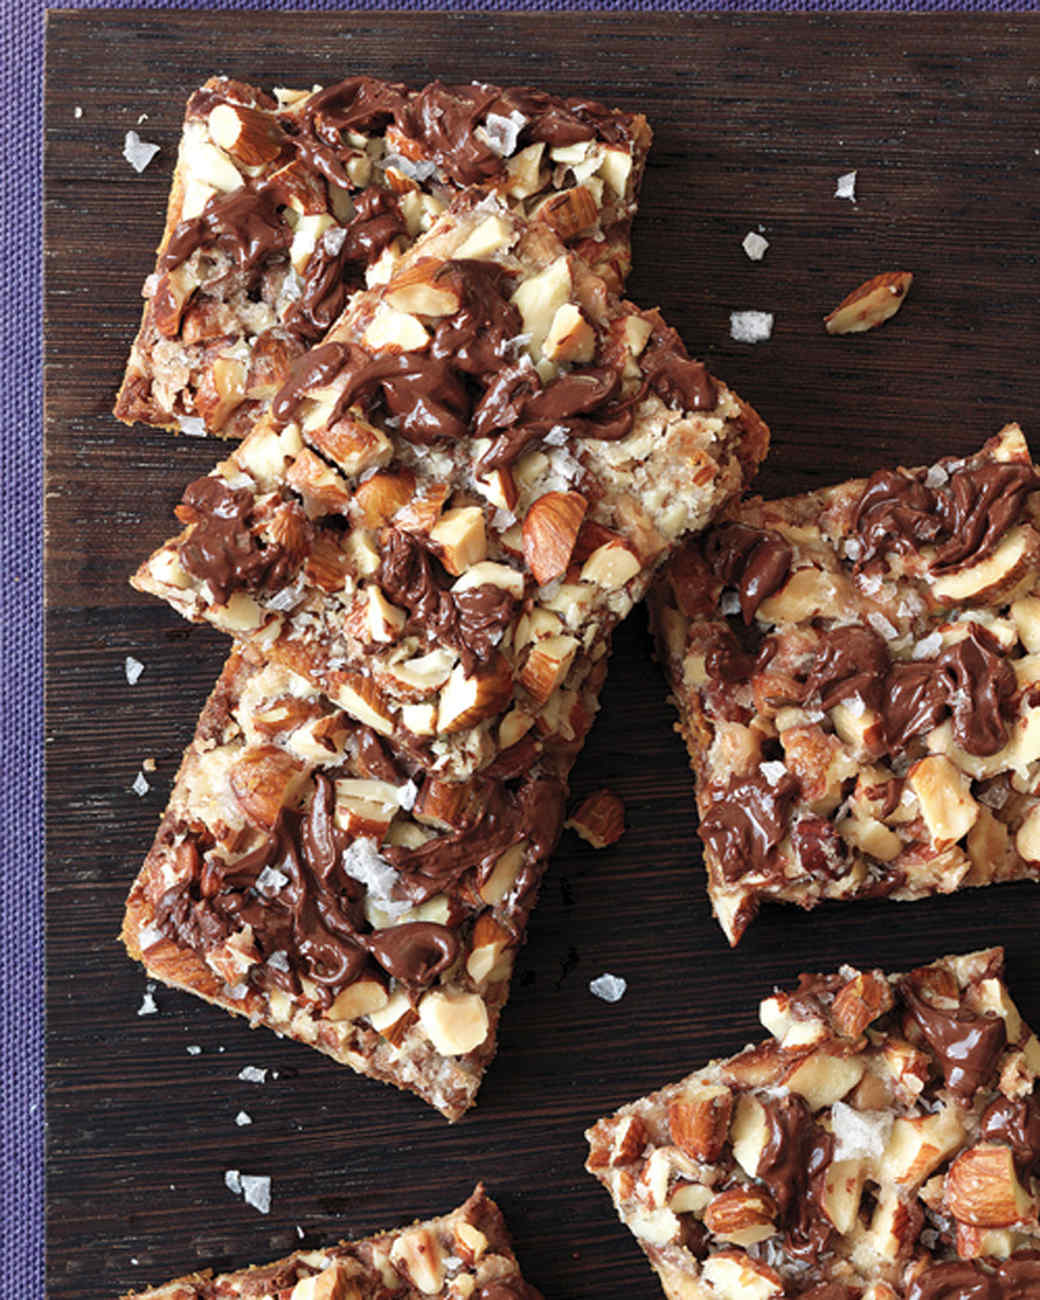 Salted Toffee-Chocolate Squares